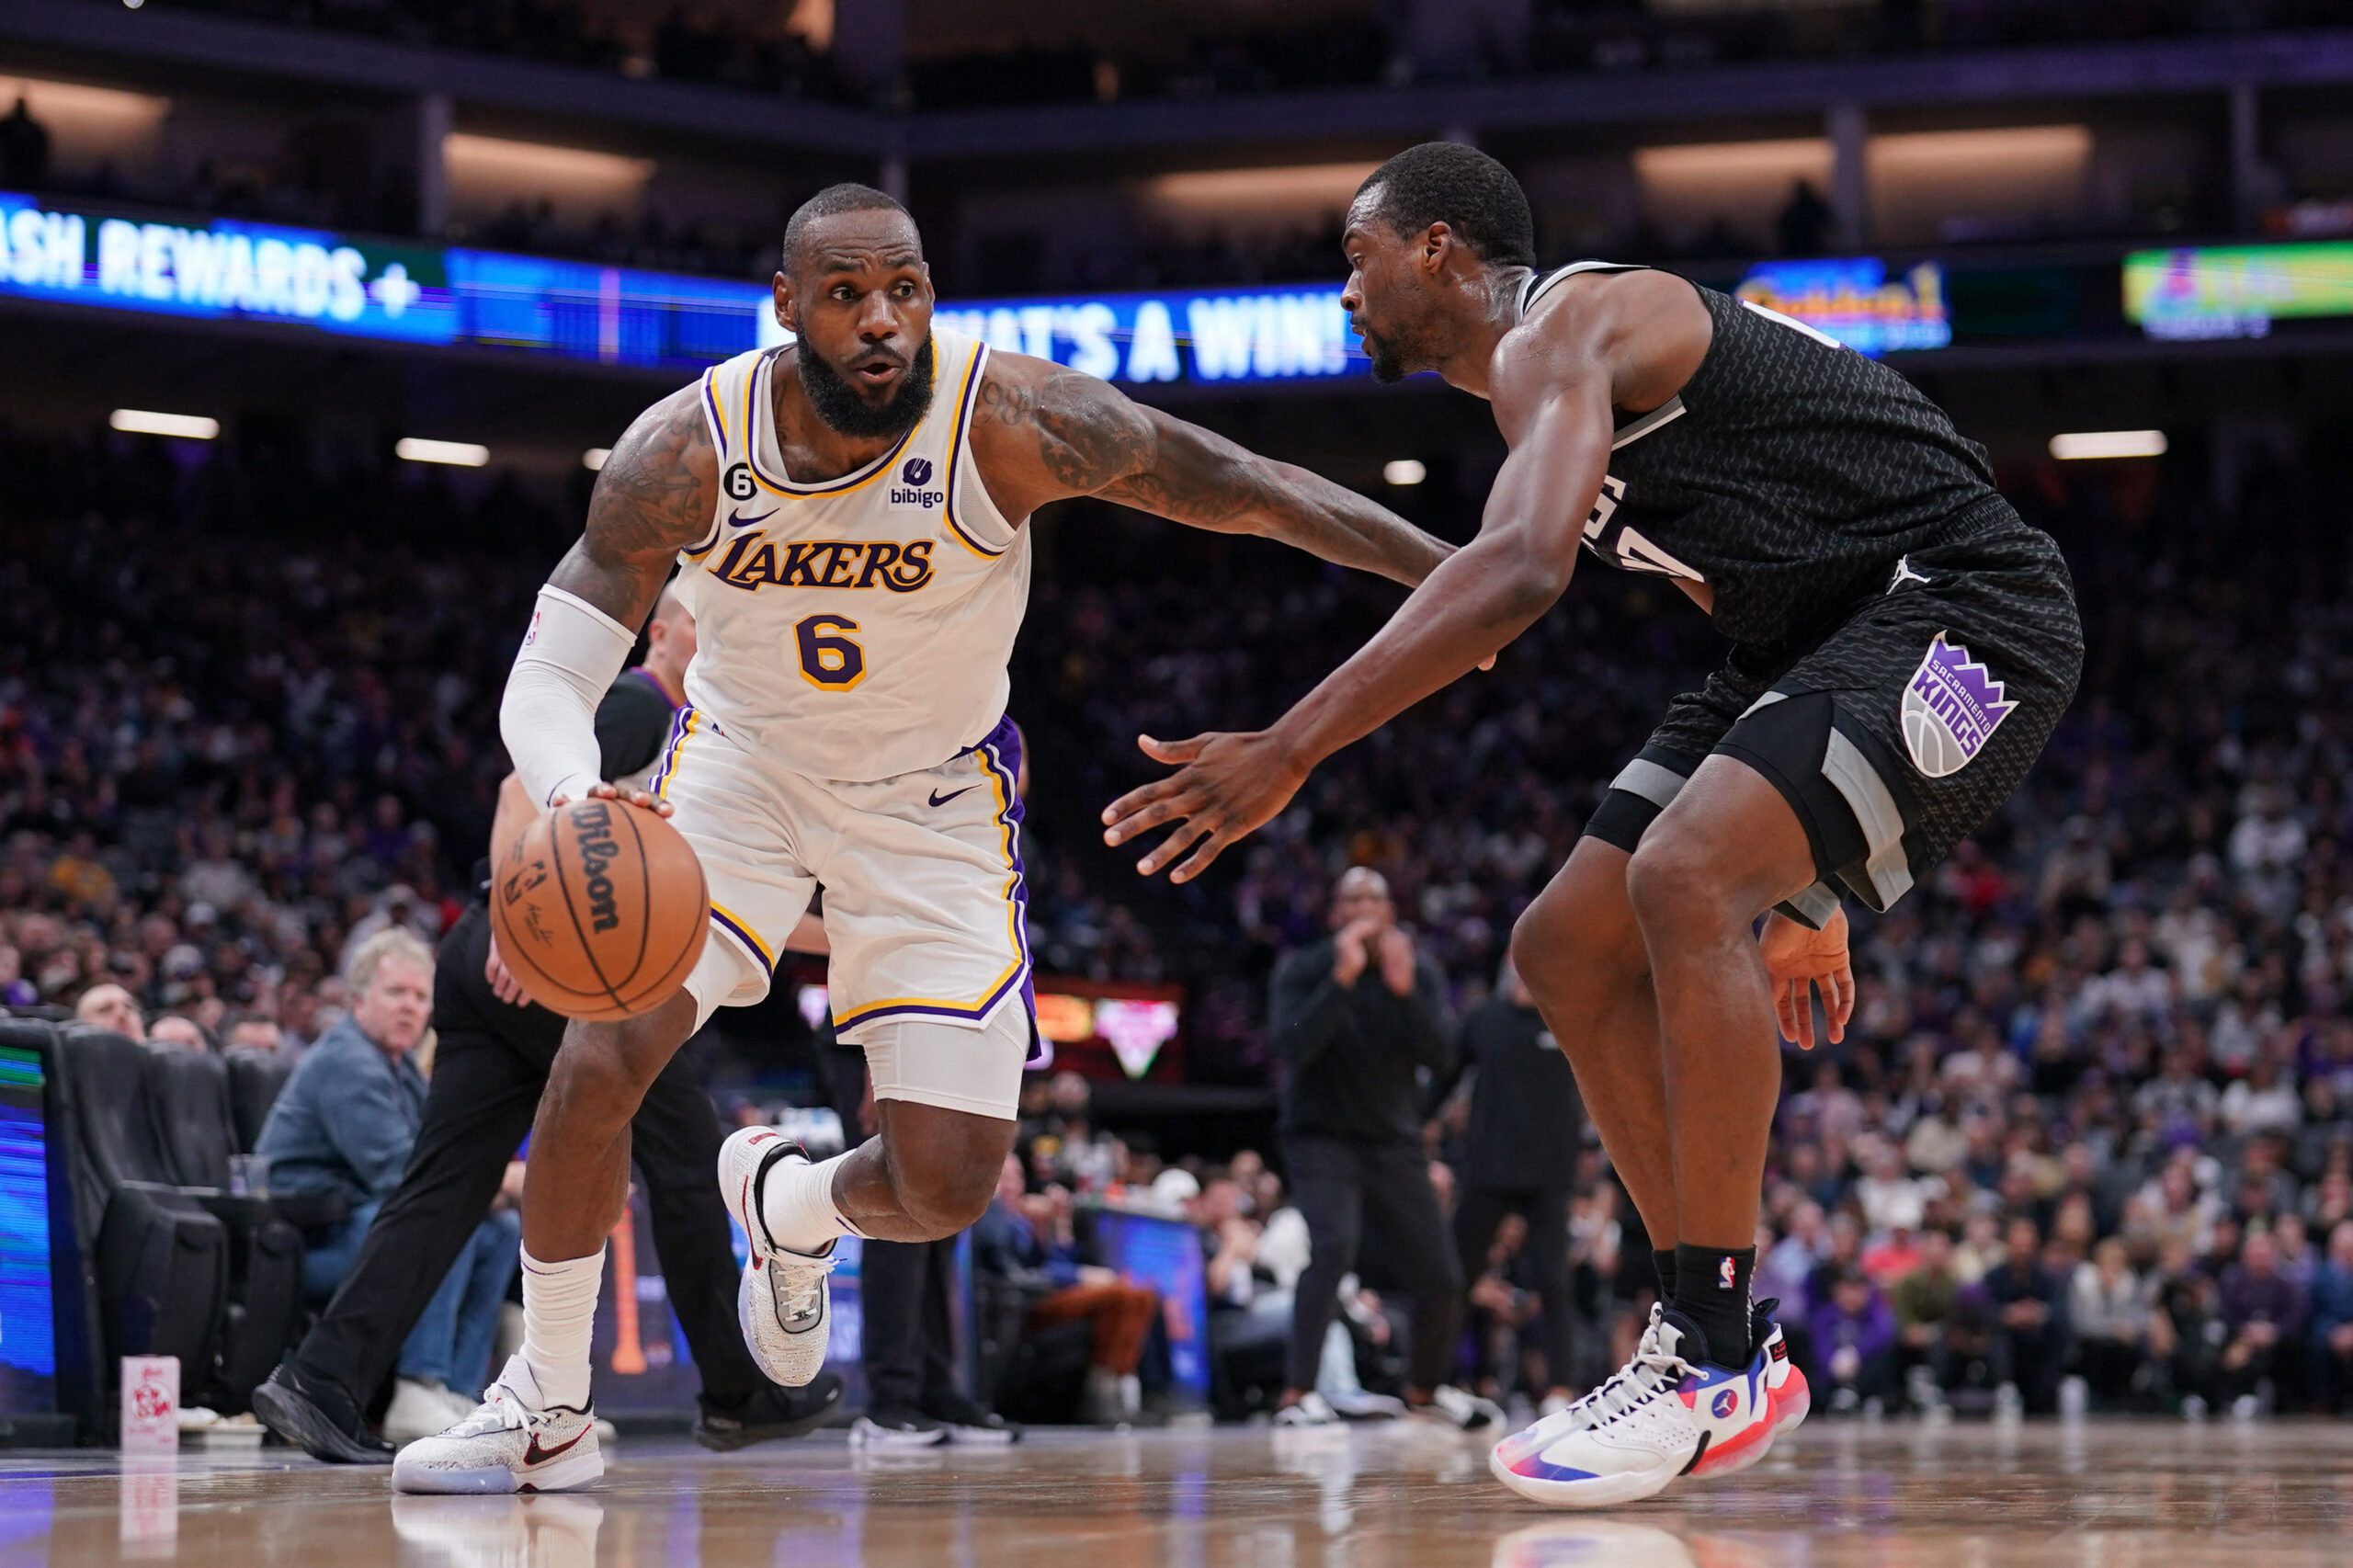 Lakers eke out win over Kings in offensive showcase